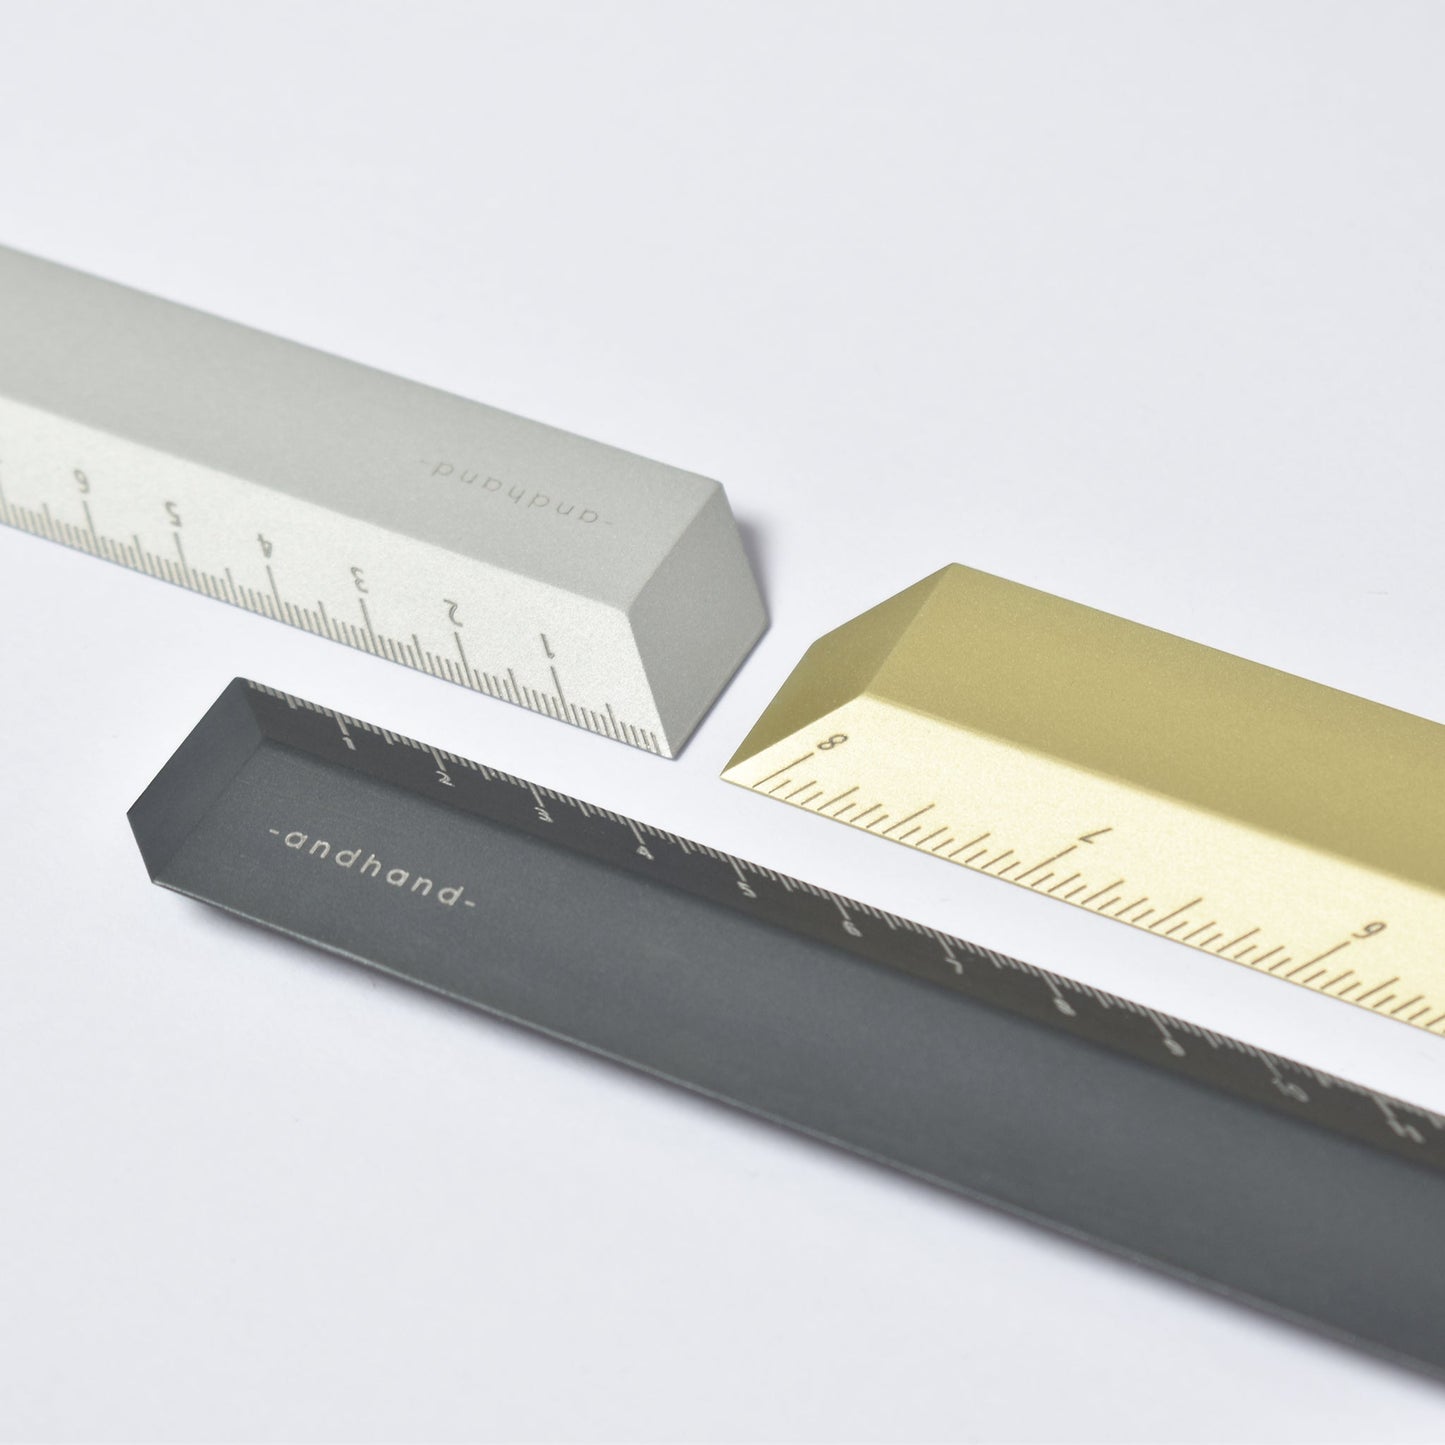 The illusion ruler by Andhand, modern and striking design. Its angled profile allows for extremely accurate mark making and measurements in both metric and imperial. Shown here in silver satin anodized finish.